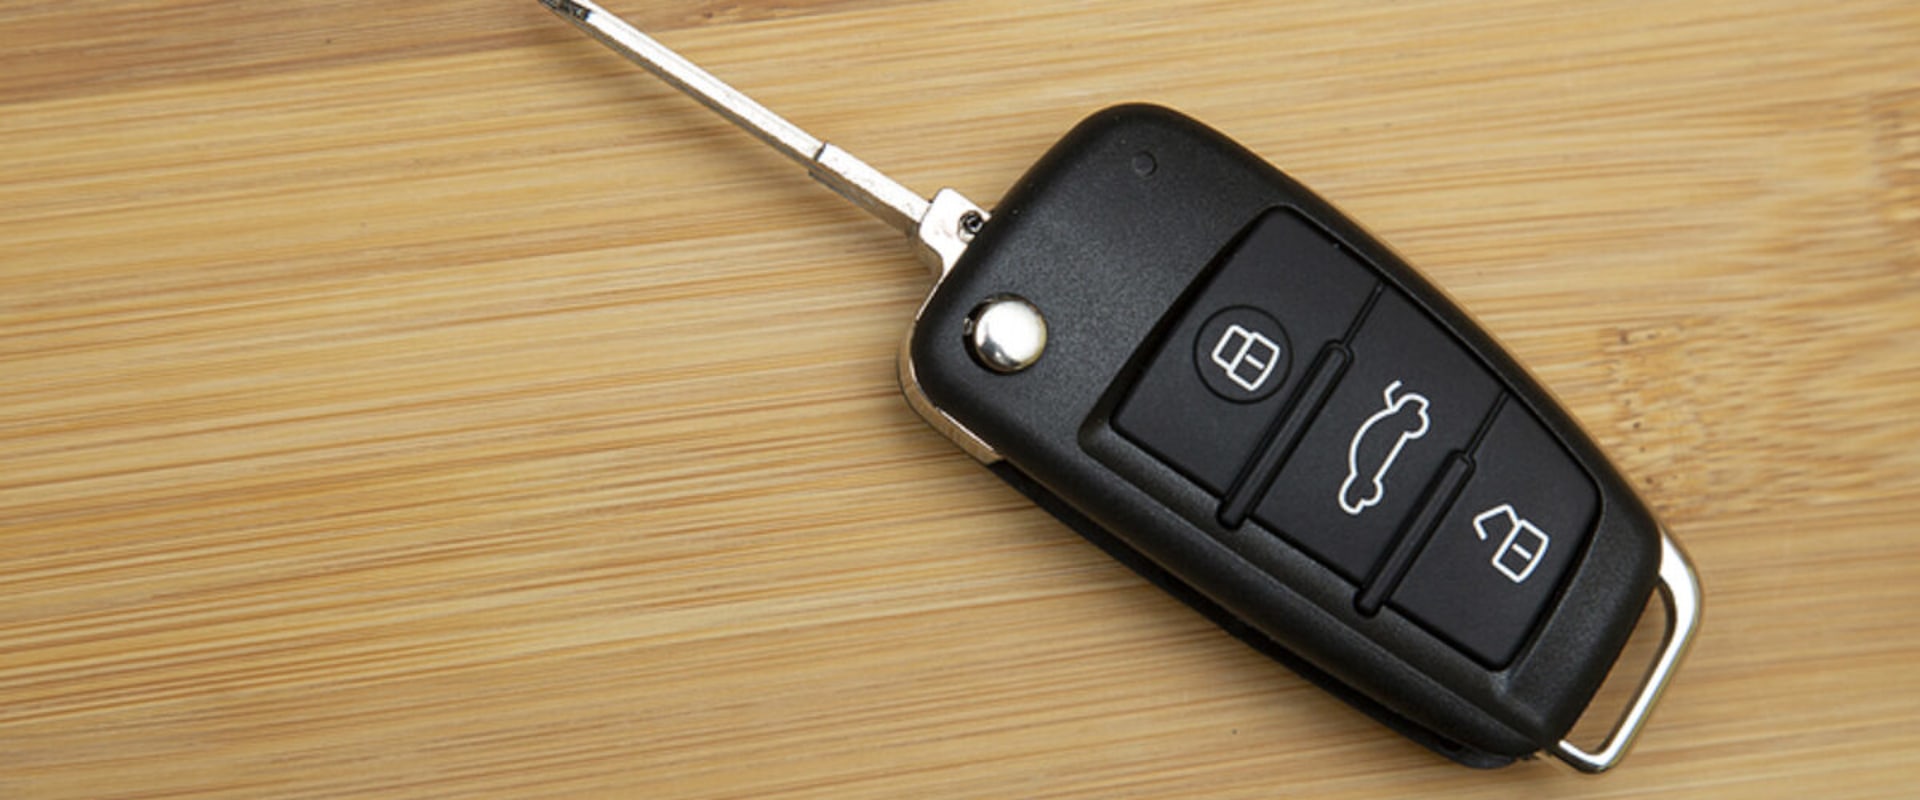 Replacing Your Transponder Chip When Getting a Car Key Replacement in Spokane